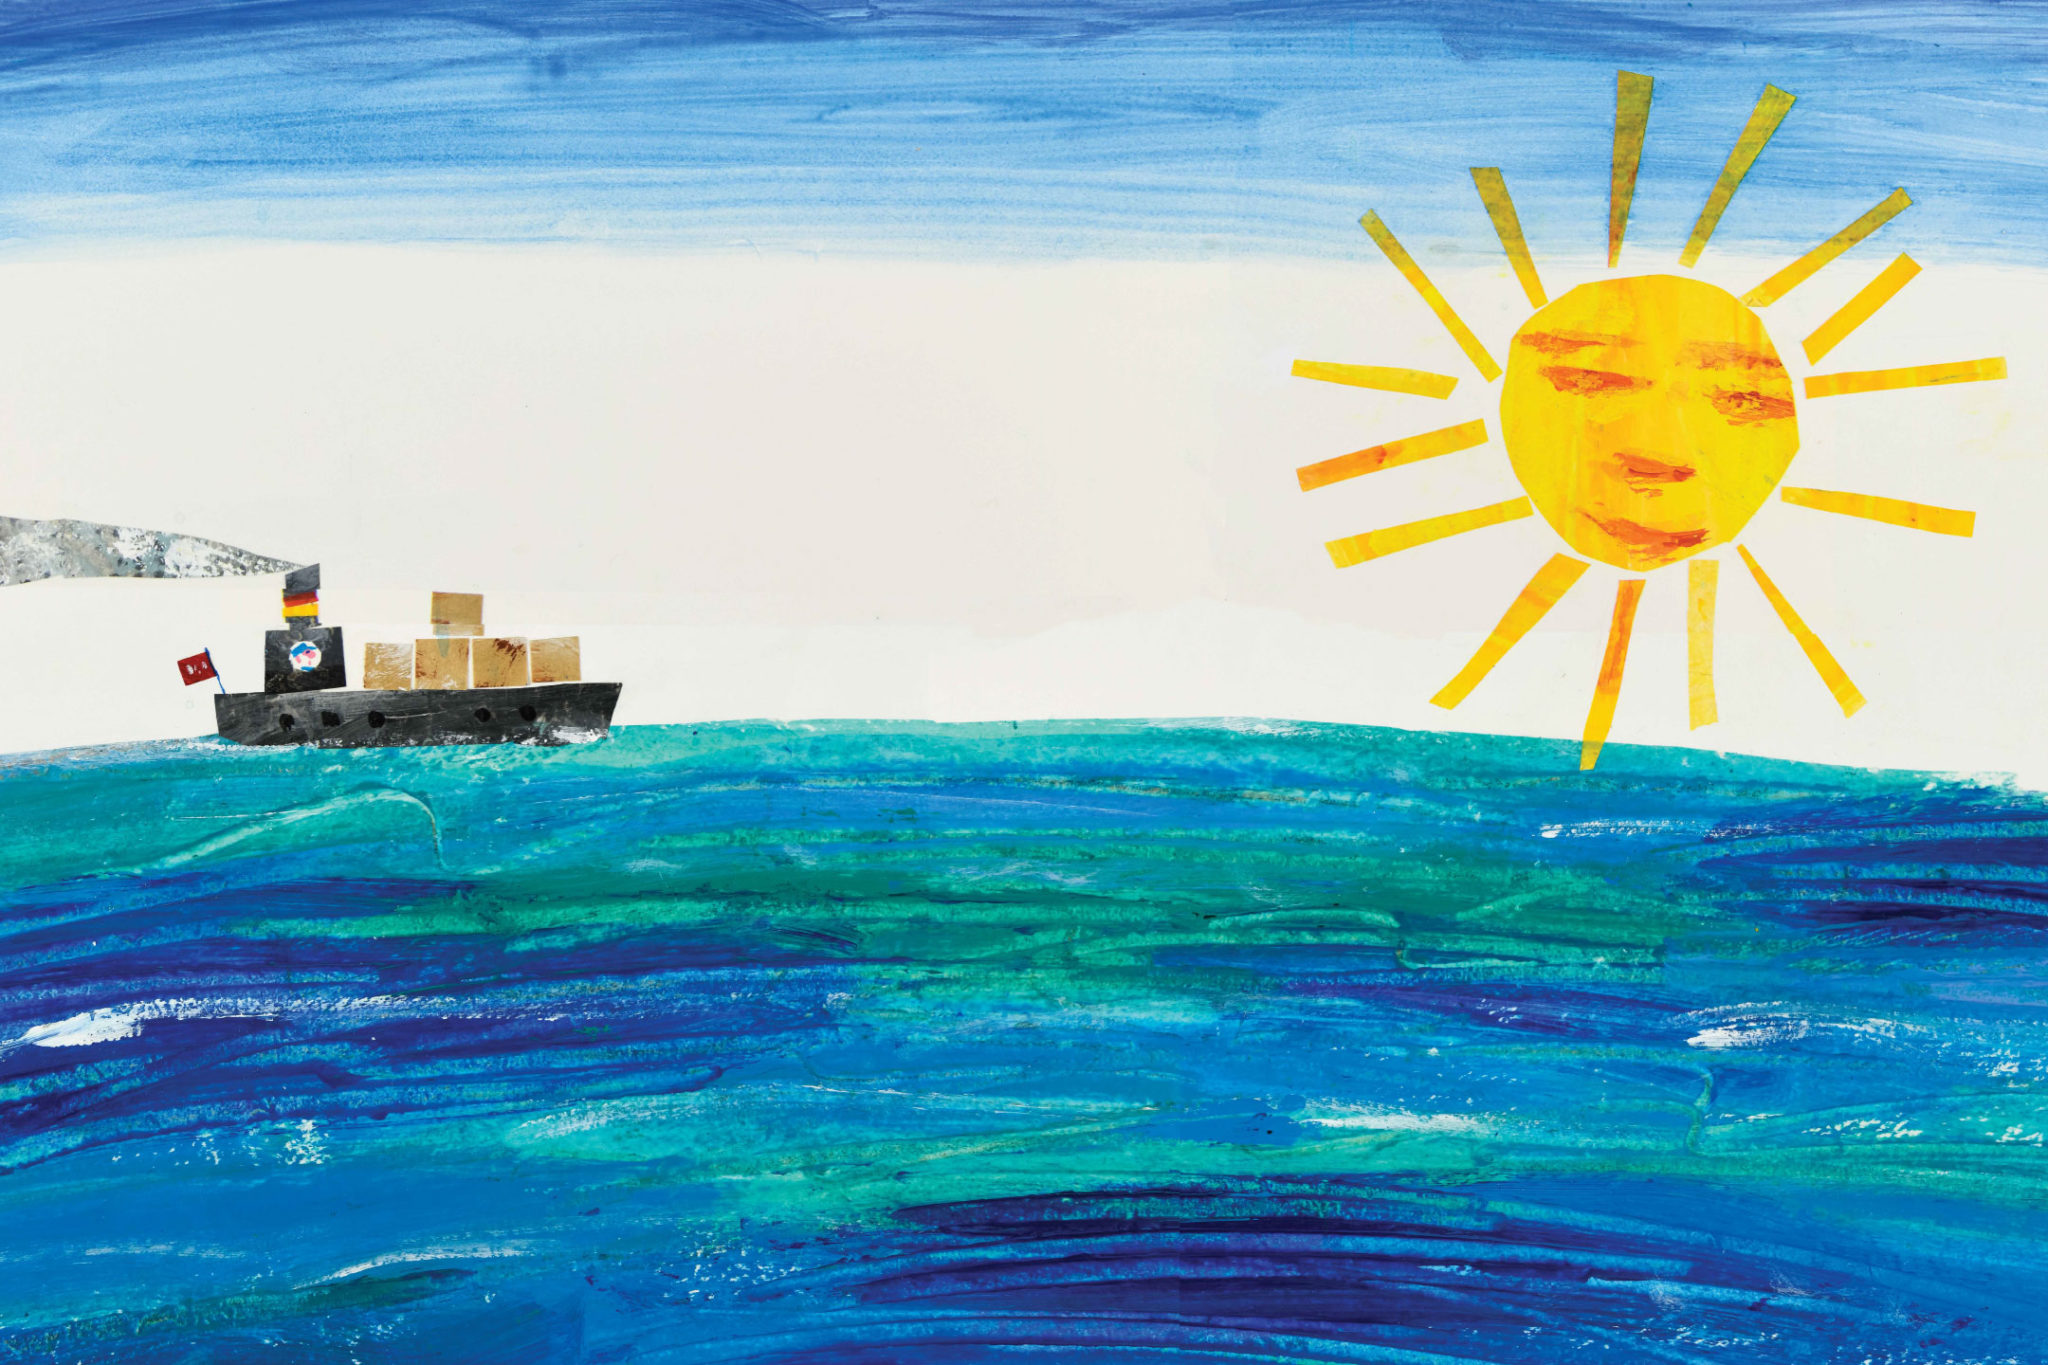 Seaport Discovery: Exploring Our Waters with Eric Carle